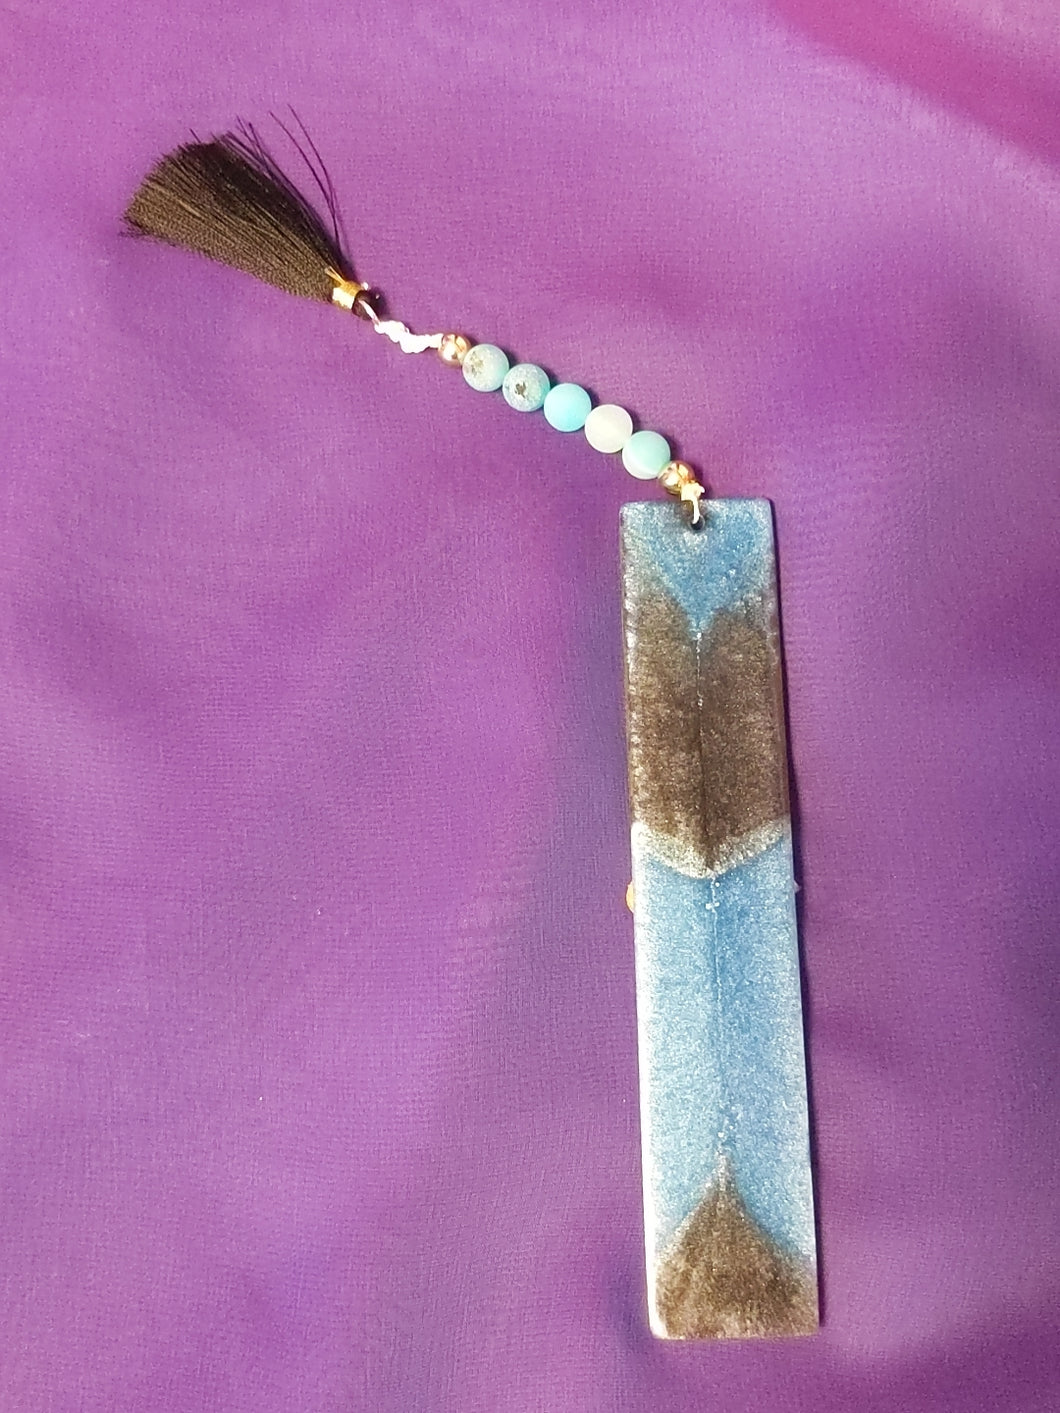 Resin Book Mark with Crystal Charm - Blue Druzy Agate